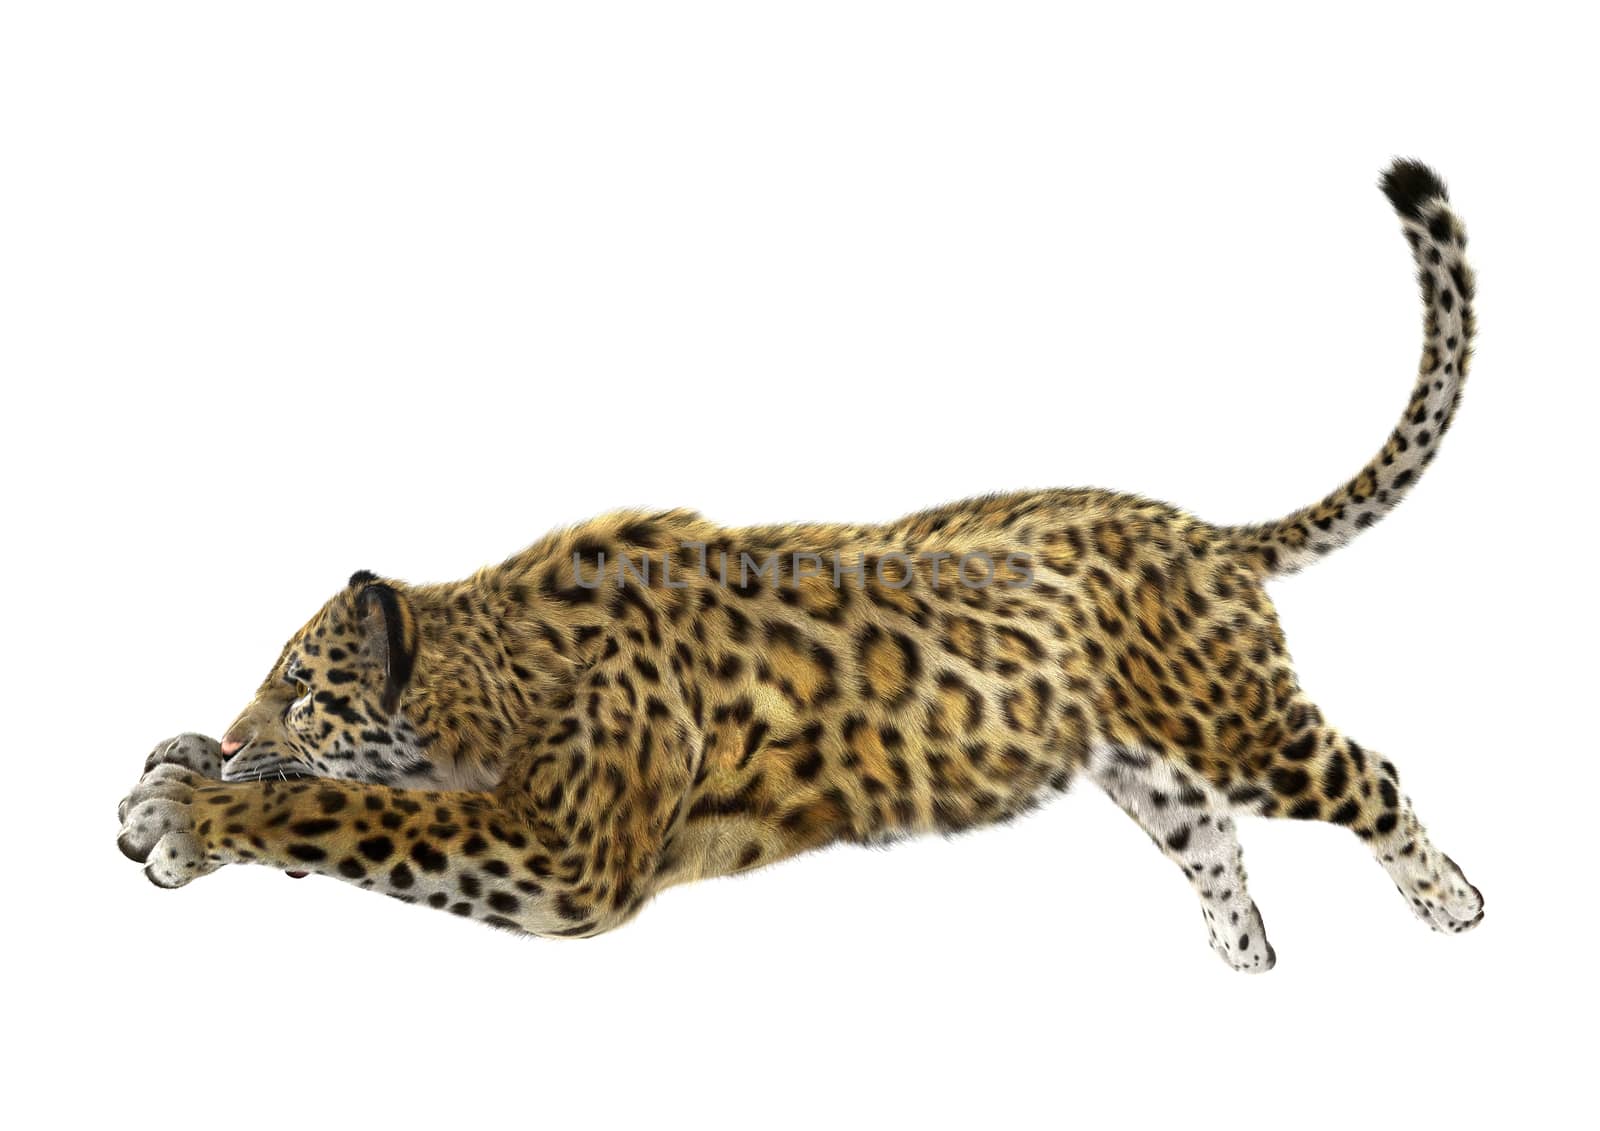 3D digital render of a big cat jaguar jumping isolated on white background